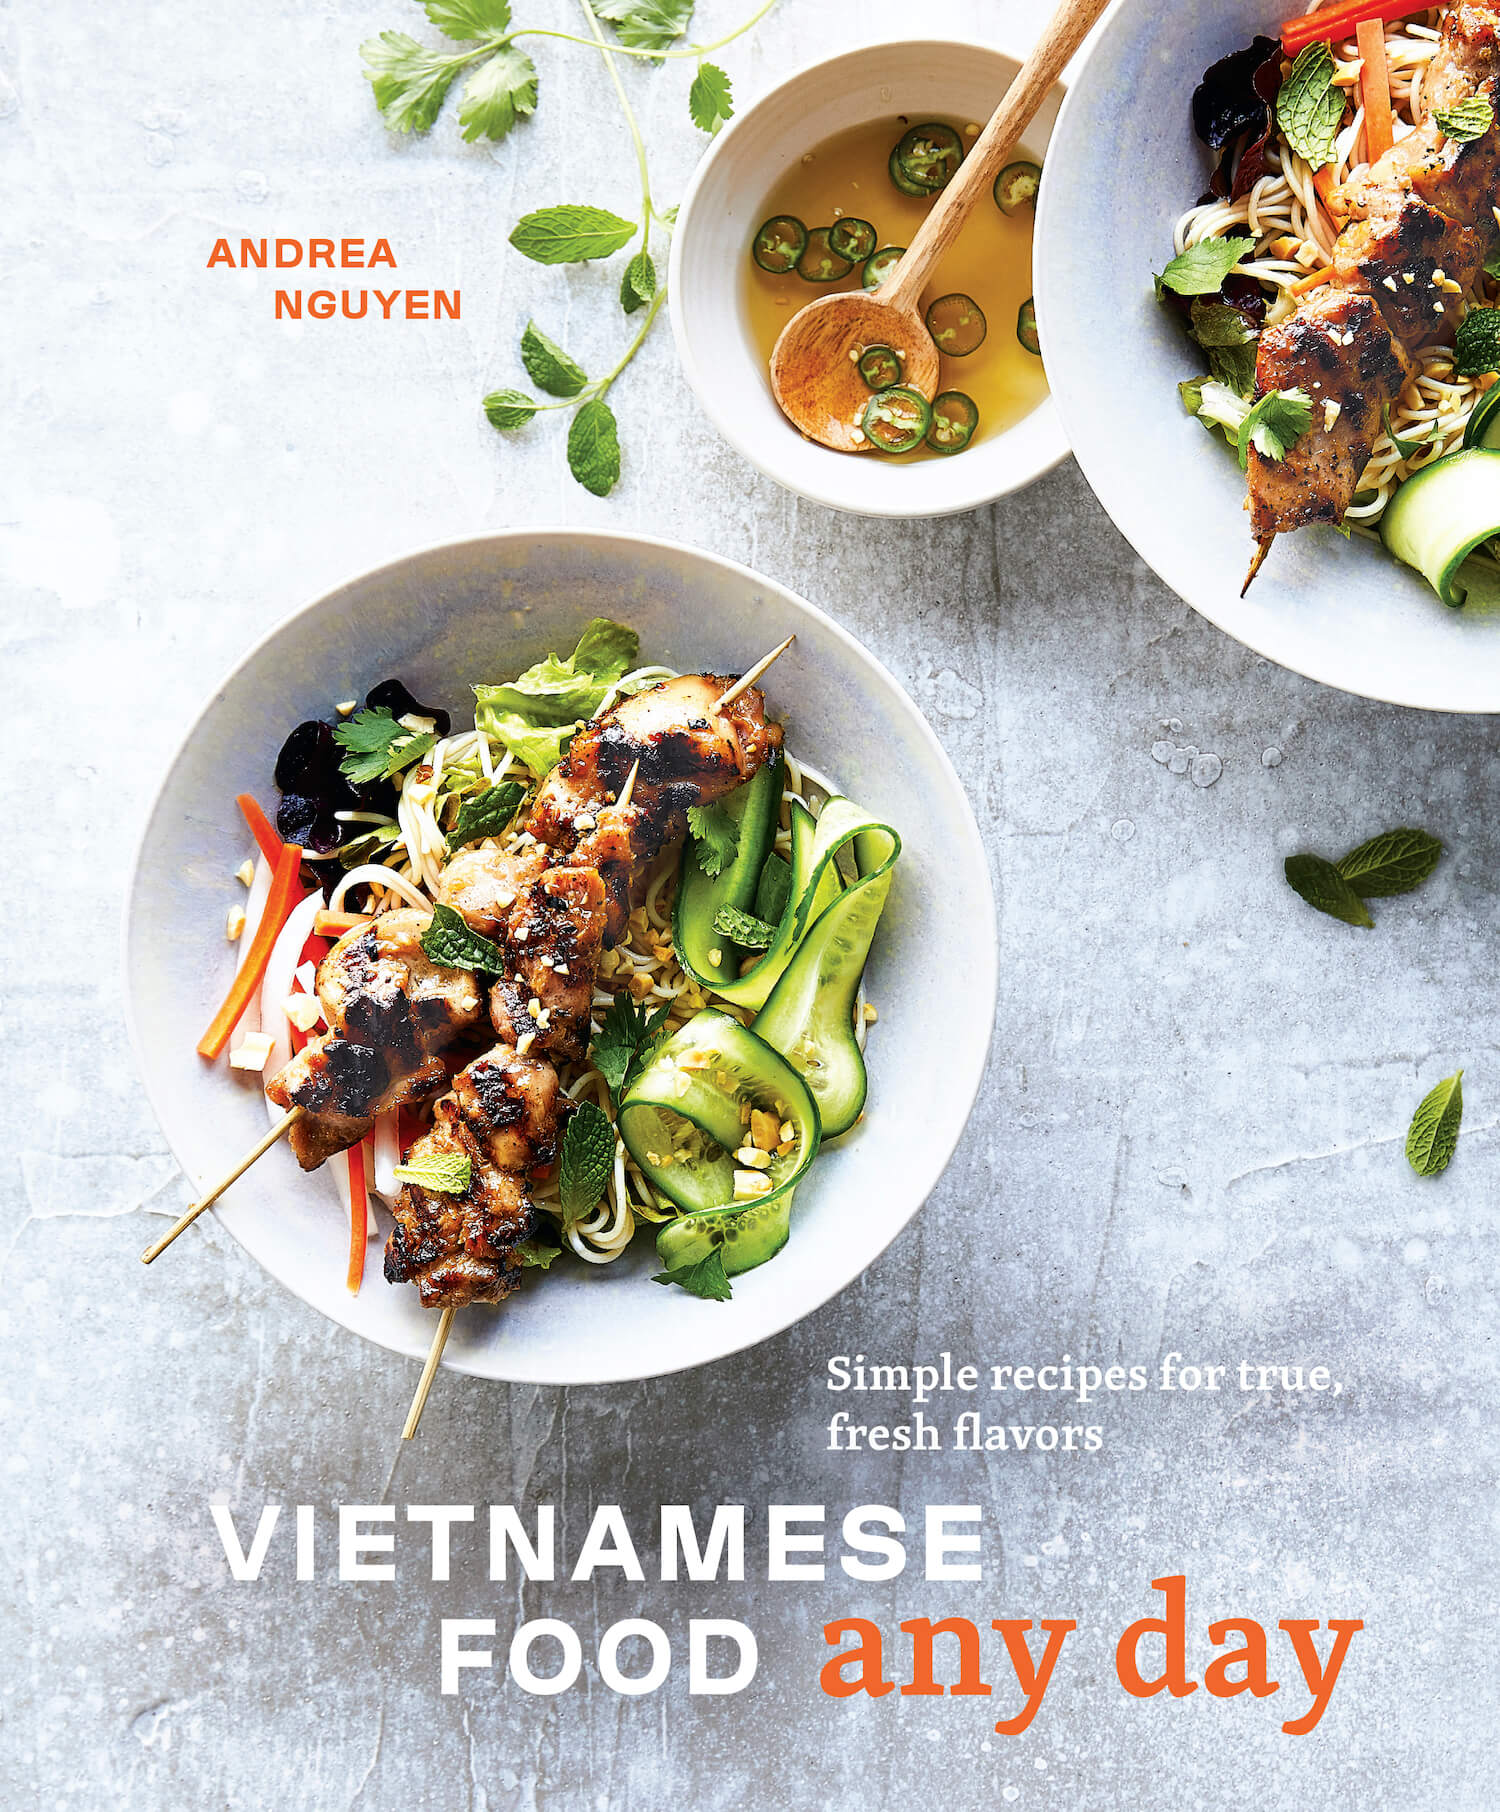 Book cover for Vietnamese Food Any Day by Andrea Nguyen. September 2021